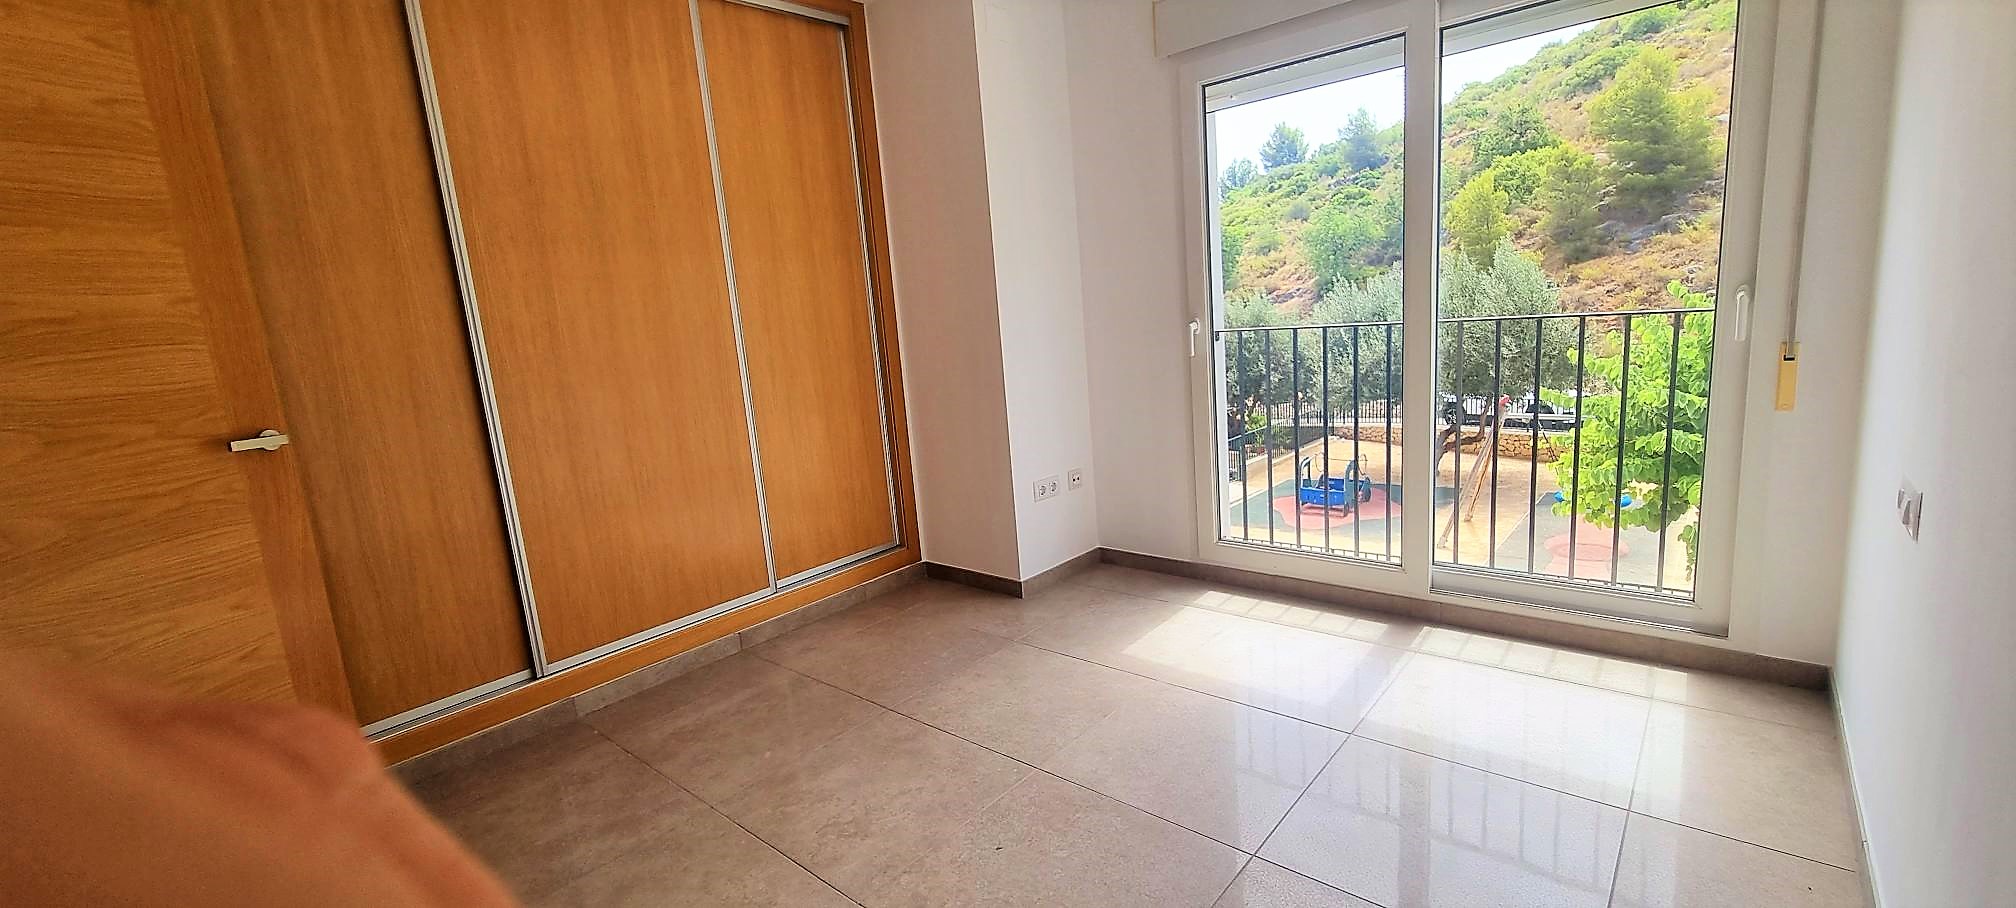 Townhouse for sale in Pedreguer